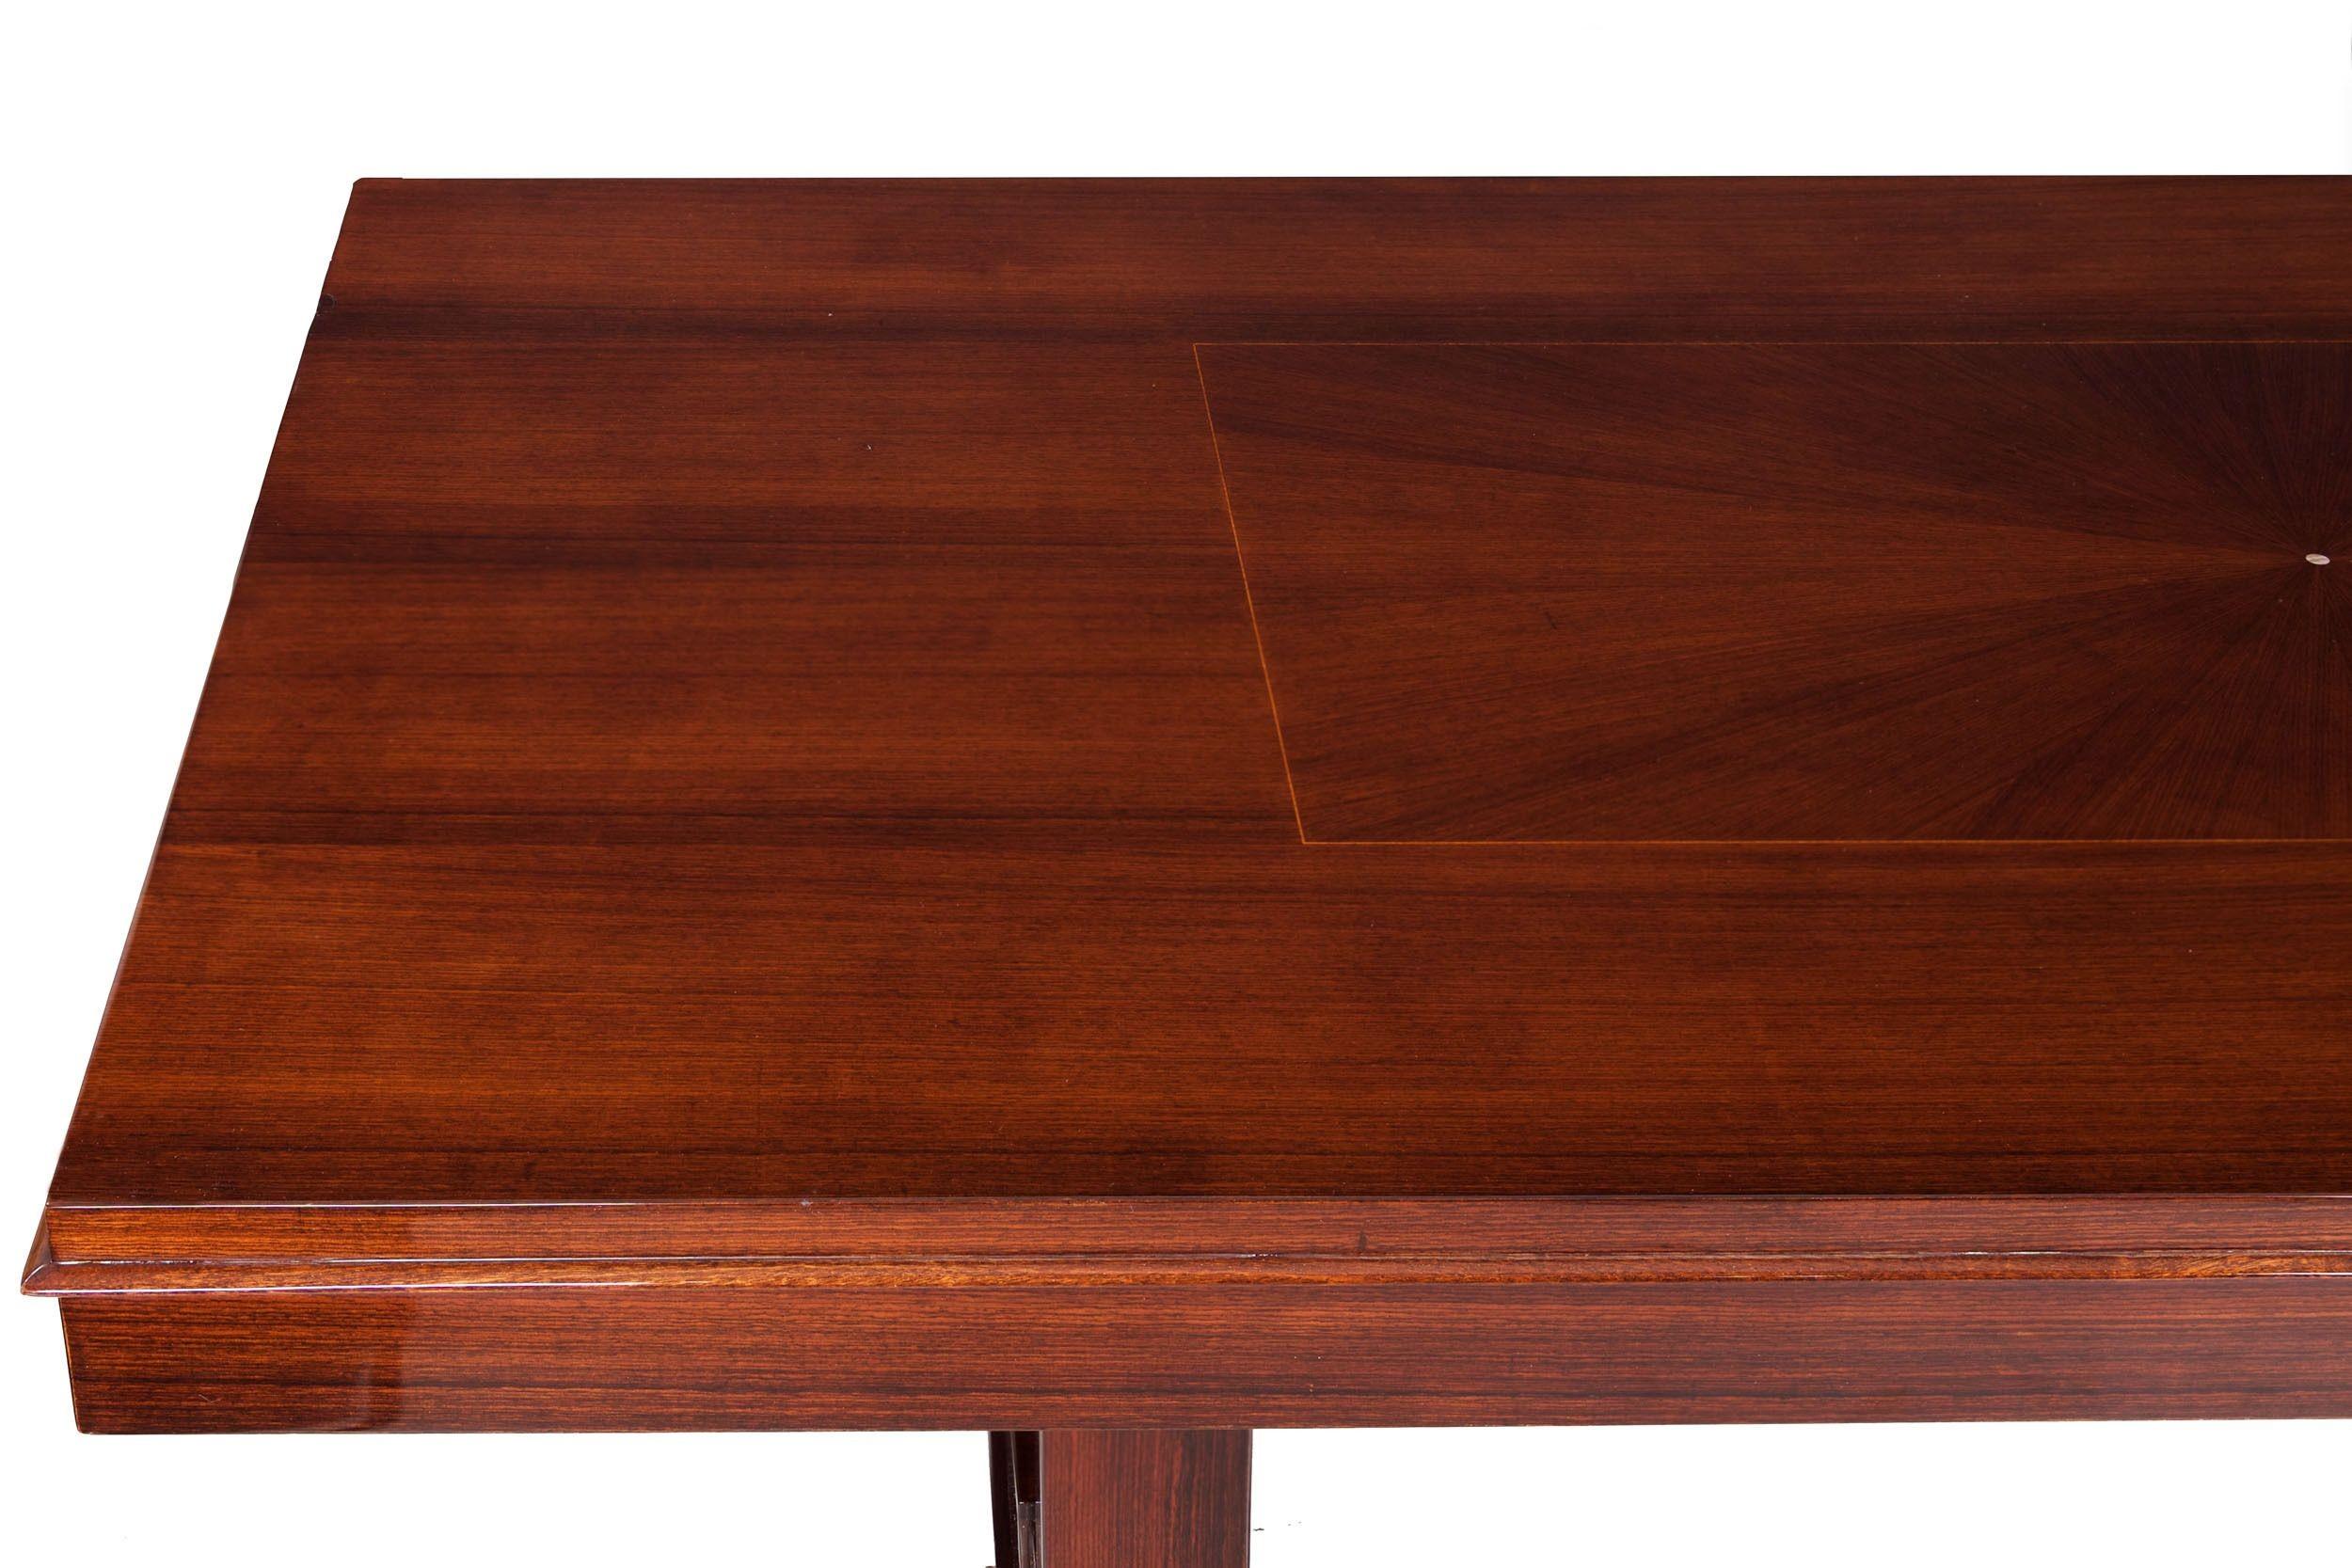 French Art Deco Inlaid Mother-of-Pearl Rosewood Dining Table, circa 1940s For Sale 16